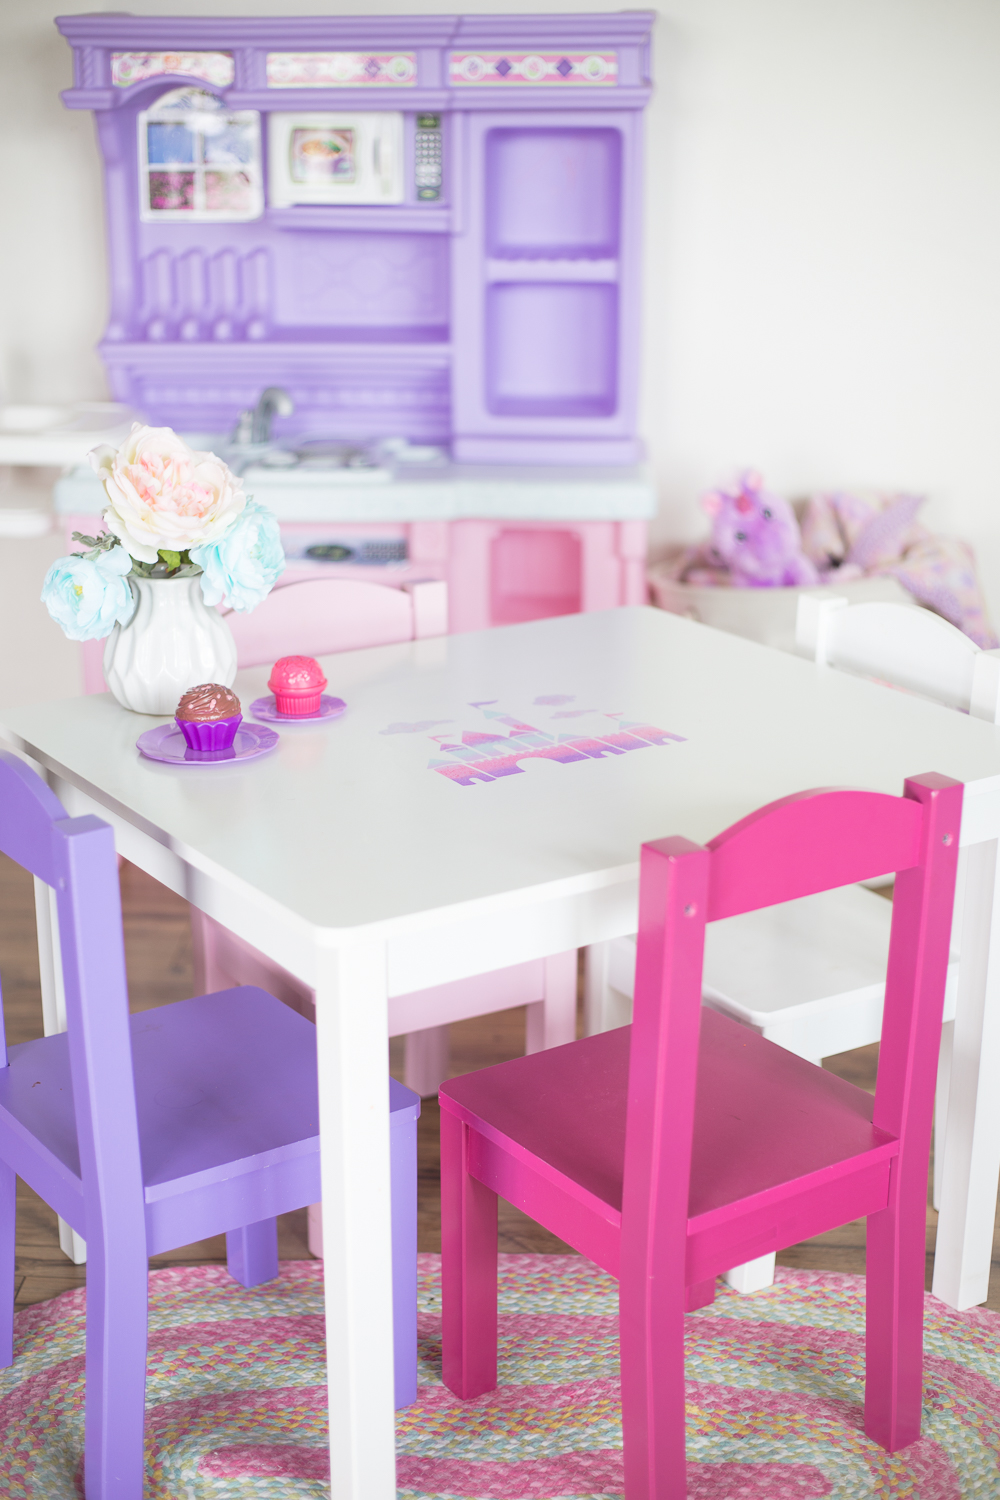 Princess Castle Toddler Desk: a fun and simple princess castle in shades of purples and pinks which is perfect for any little girls room.  The adhesive stencil makes this for a quick afternoon craft.